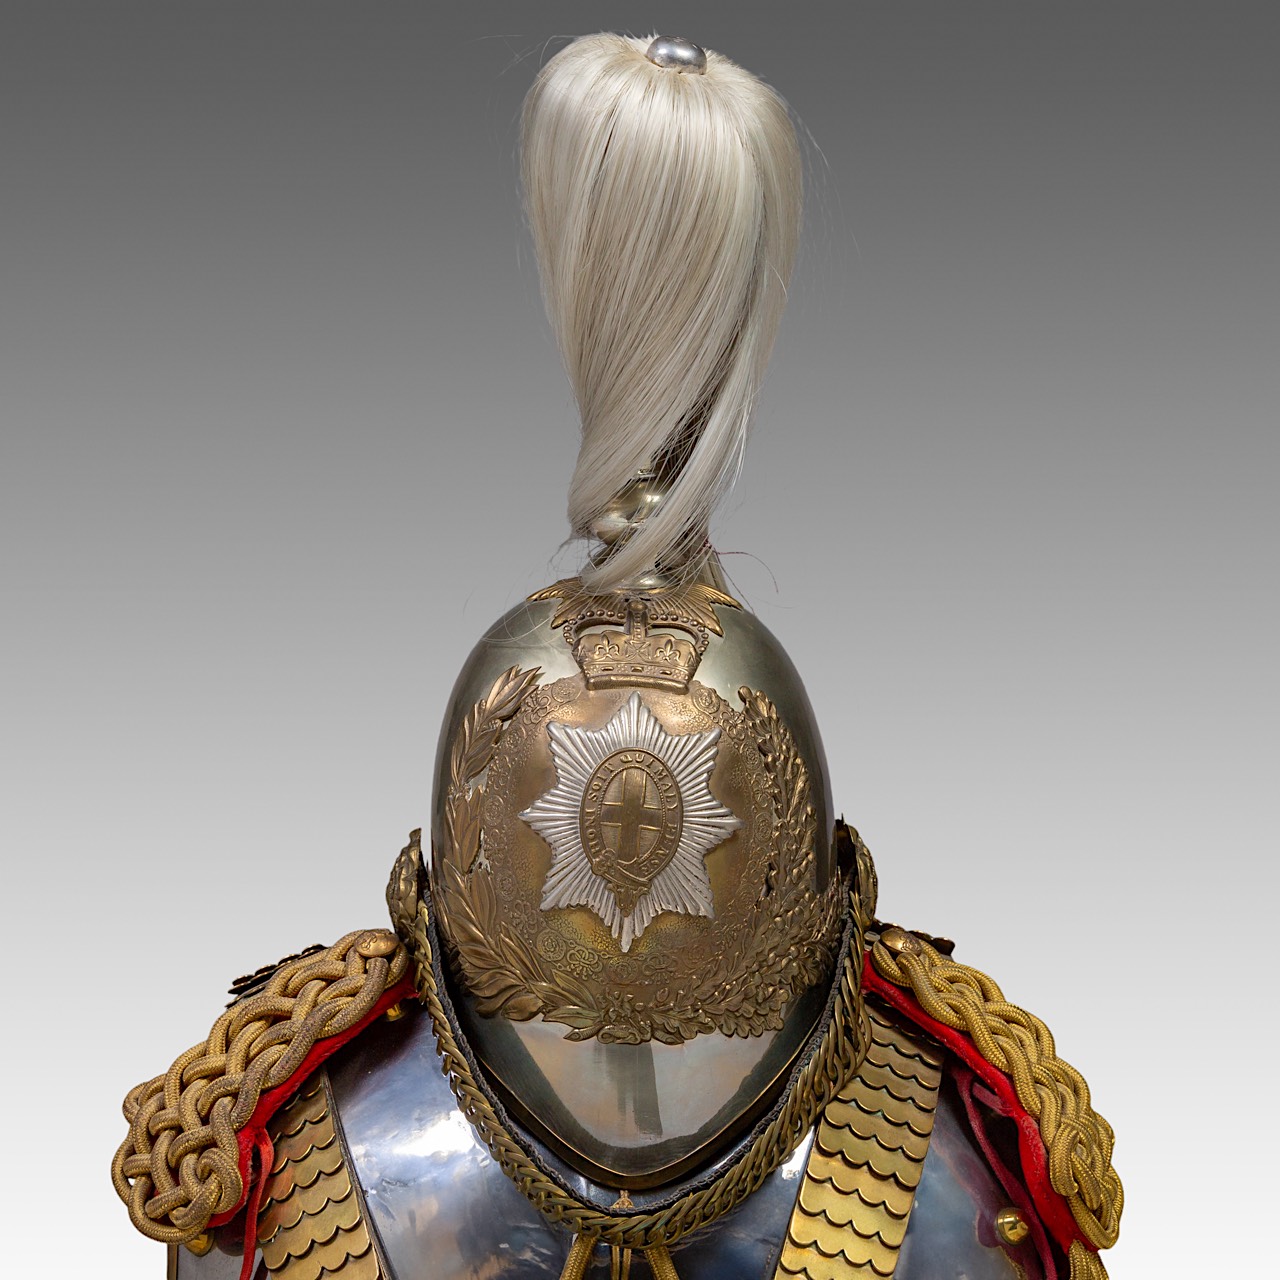 cuirass and helmet of the Royal Horse guards, metal and brass,1952 (Eliabeth II) 88 x 36 x 44 cm. (3 - Image 6 of 6